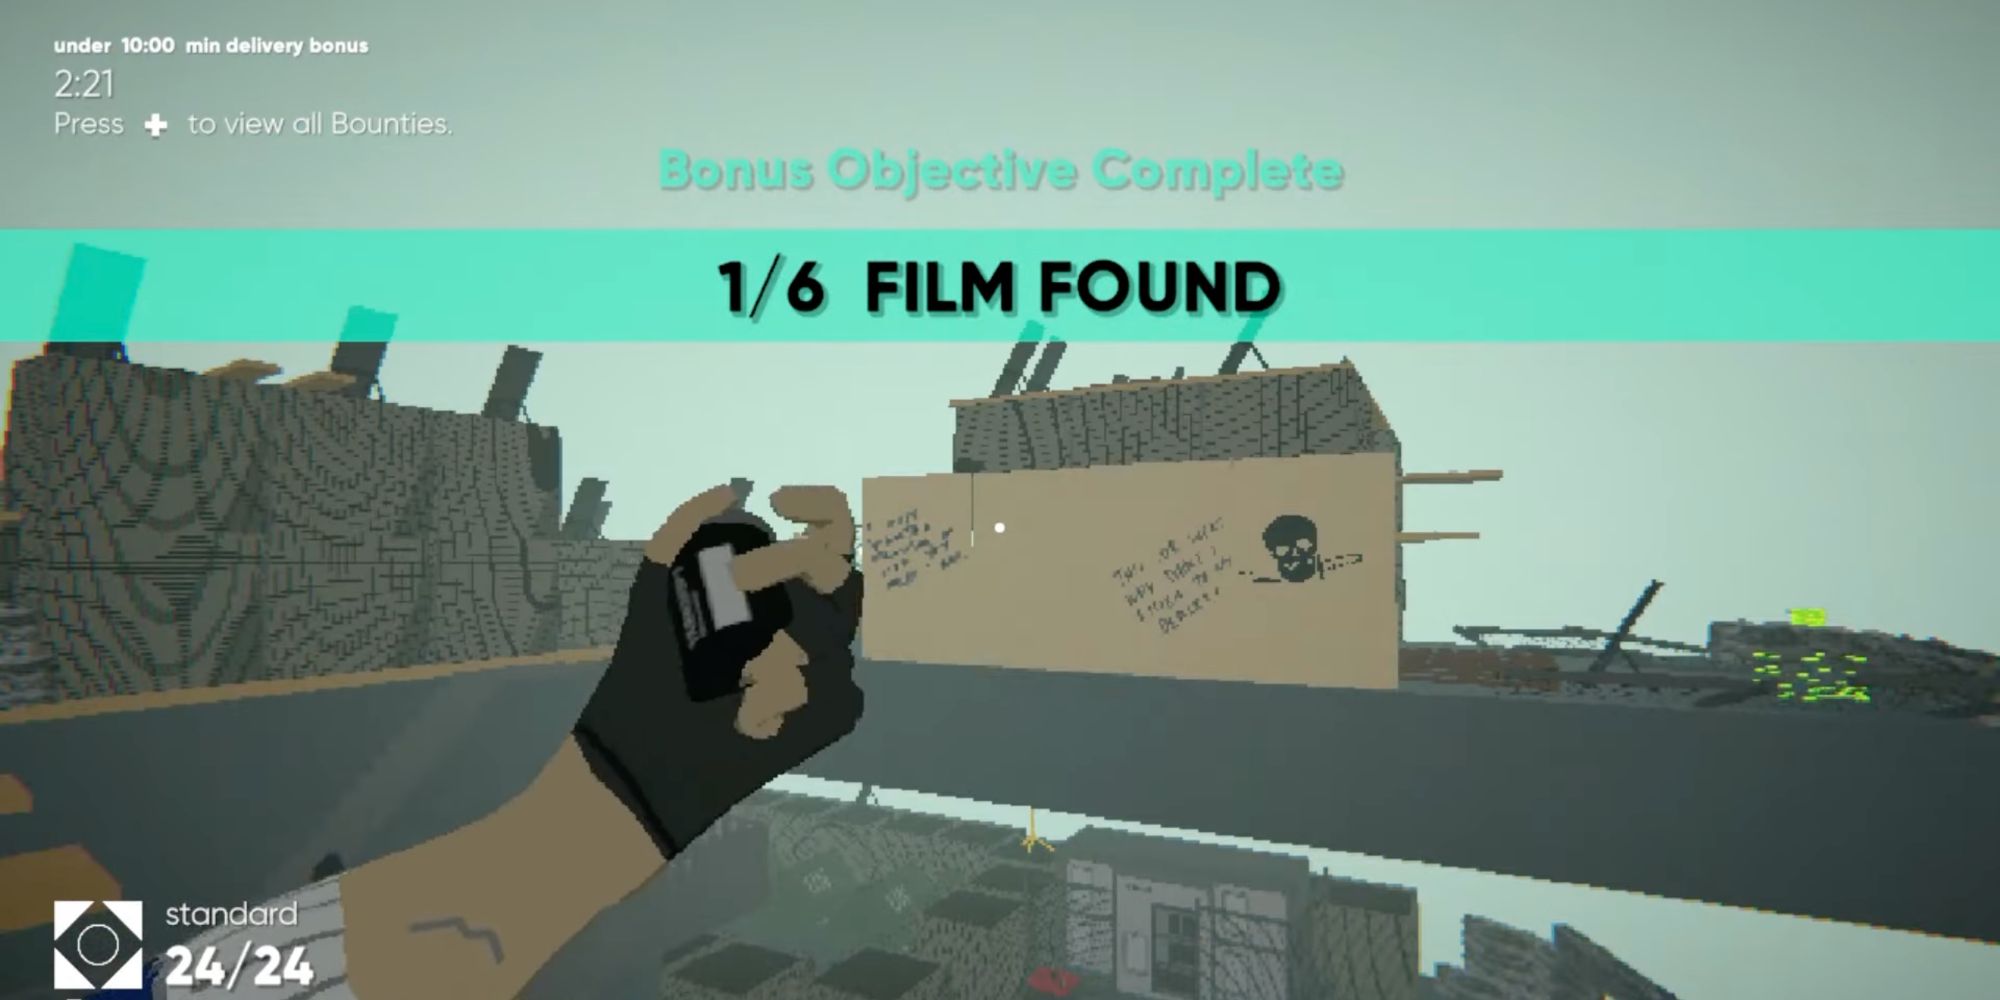 A player picks up a hidden film canister in Umurangi Generation